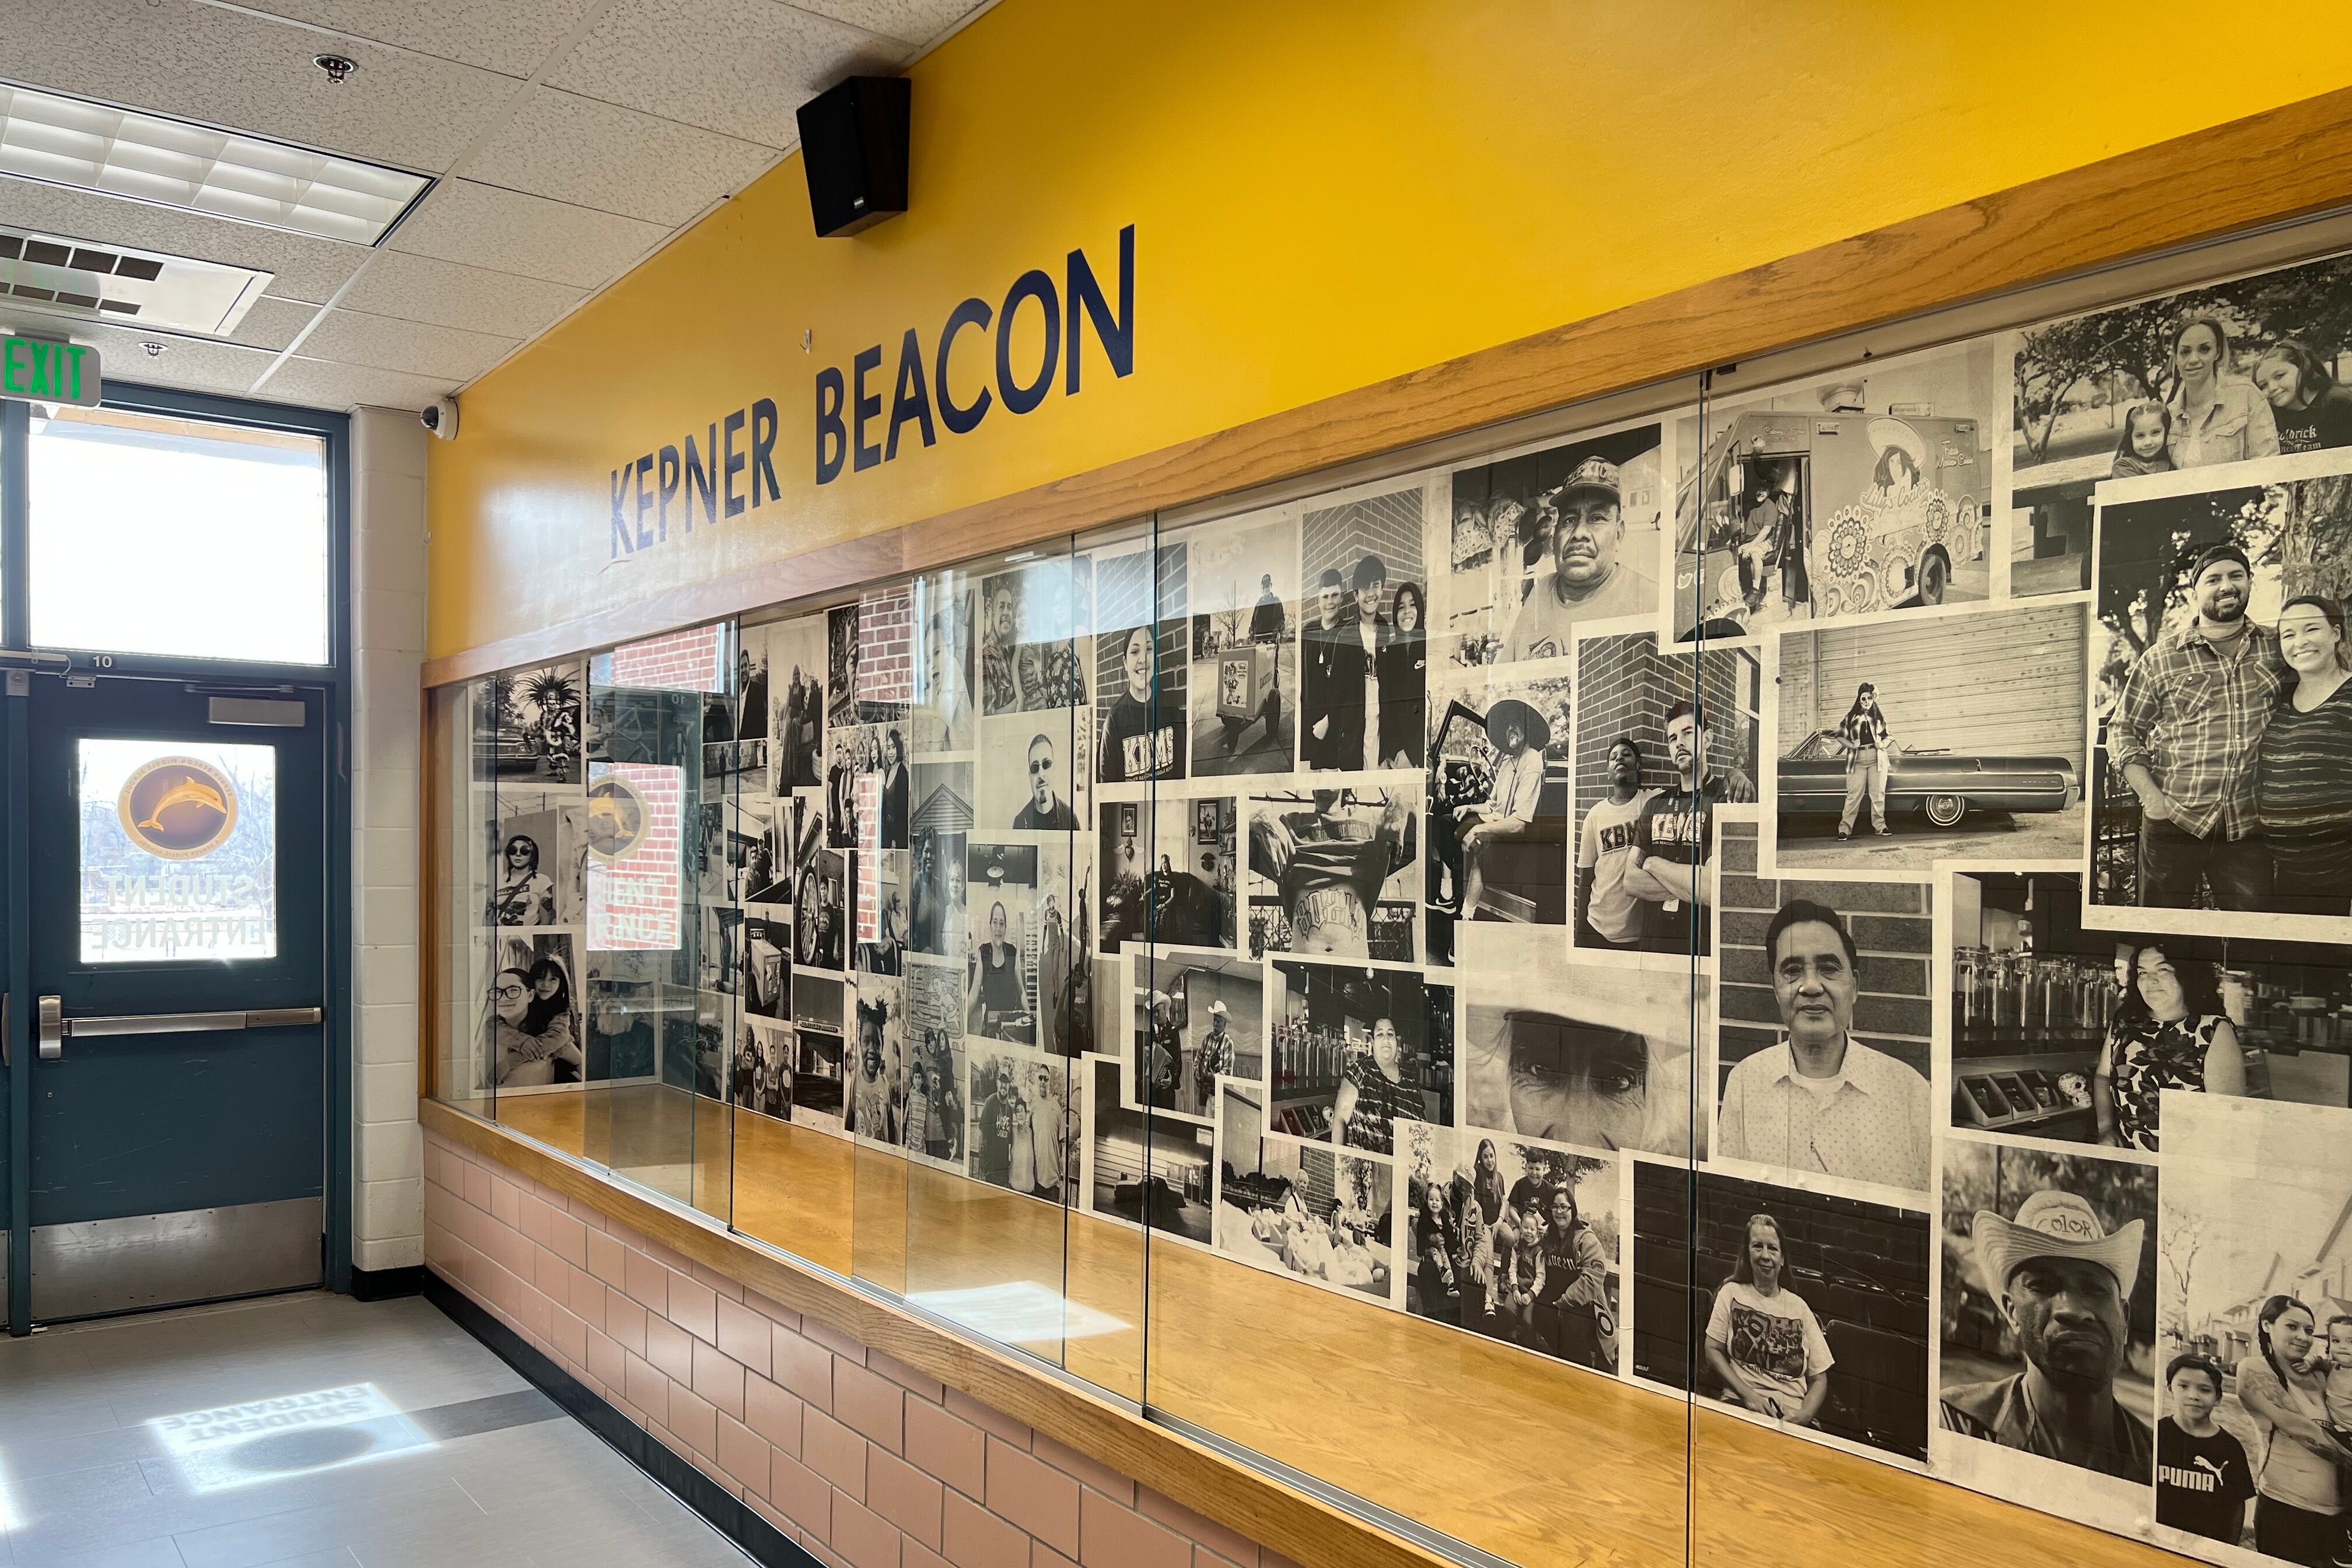 Image shows a display case full of black-and-white photos in the entry way of Kepner Beacon Middle School. The words Kepner Beacon appear above in a yellow field.